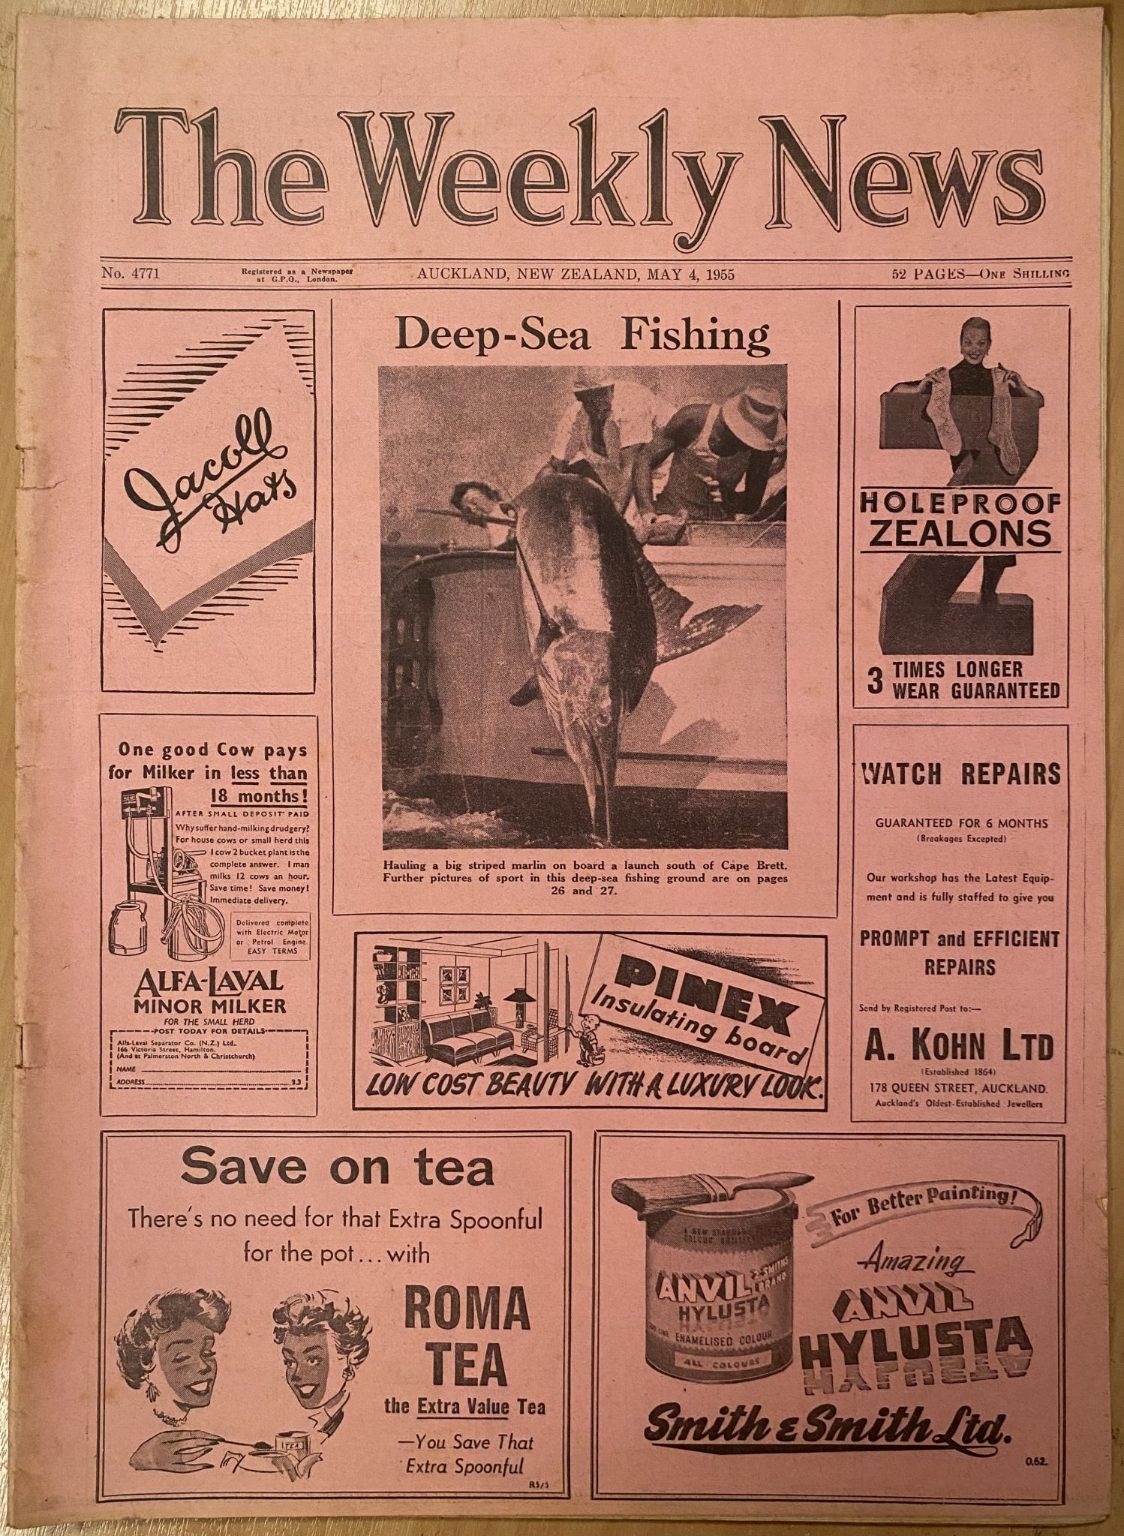 OLD NEWSPAPER: The Weekly News - No. 4771, 4 May 1955